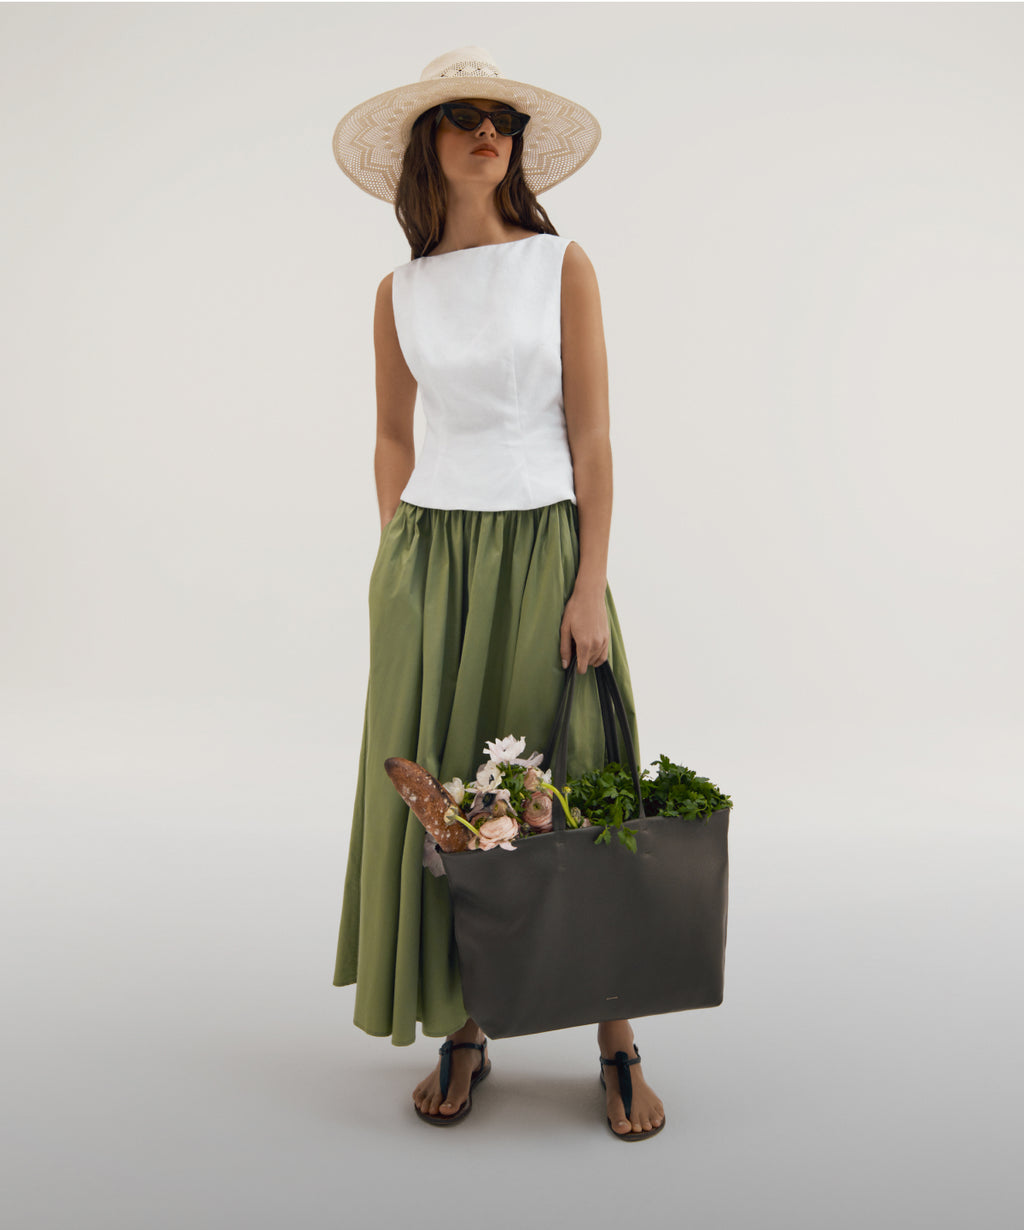 Linked Image: Directs to Summer Collection preview, Image Description: Model wearing Cuyana Open Weave Ecuador Hat in color Natural, Poplin Gathered Skirt in color Sage and a white top, carrying the Cuyana Easy Tote in color Dark Olive. 